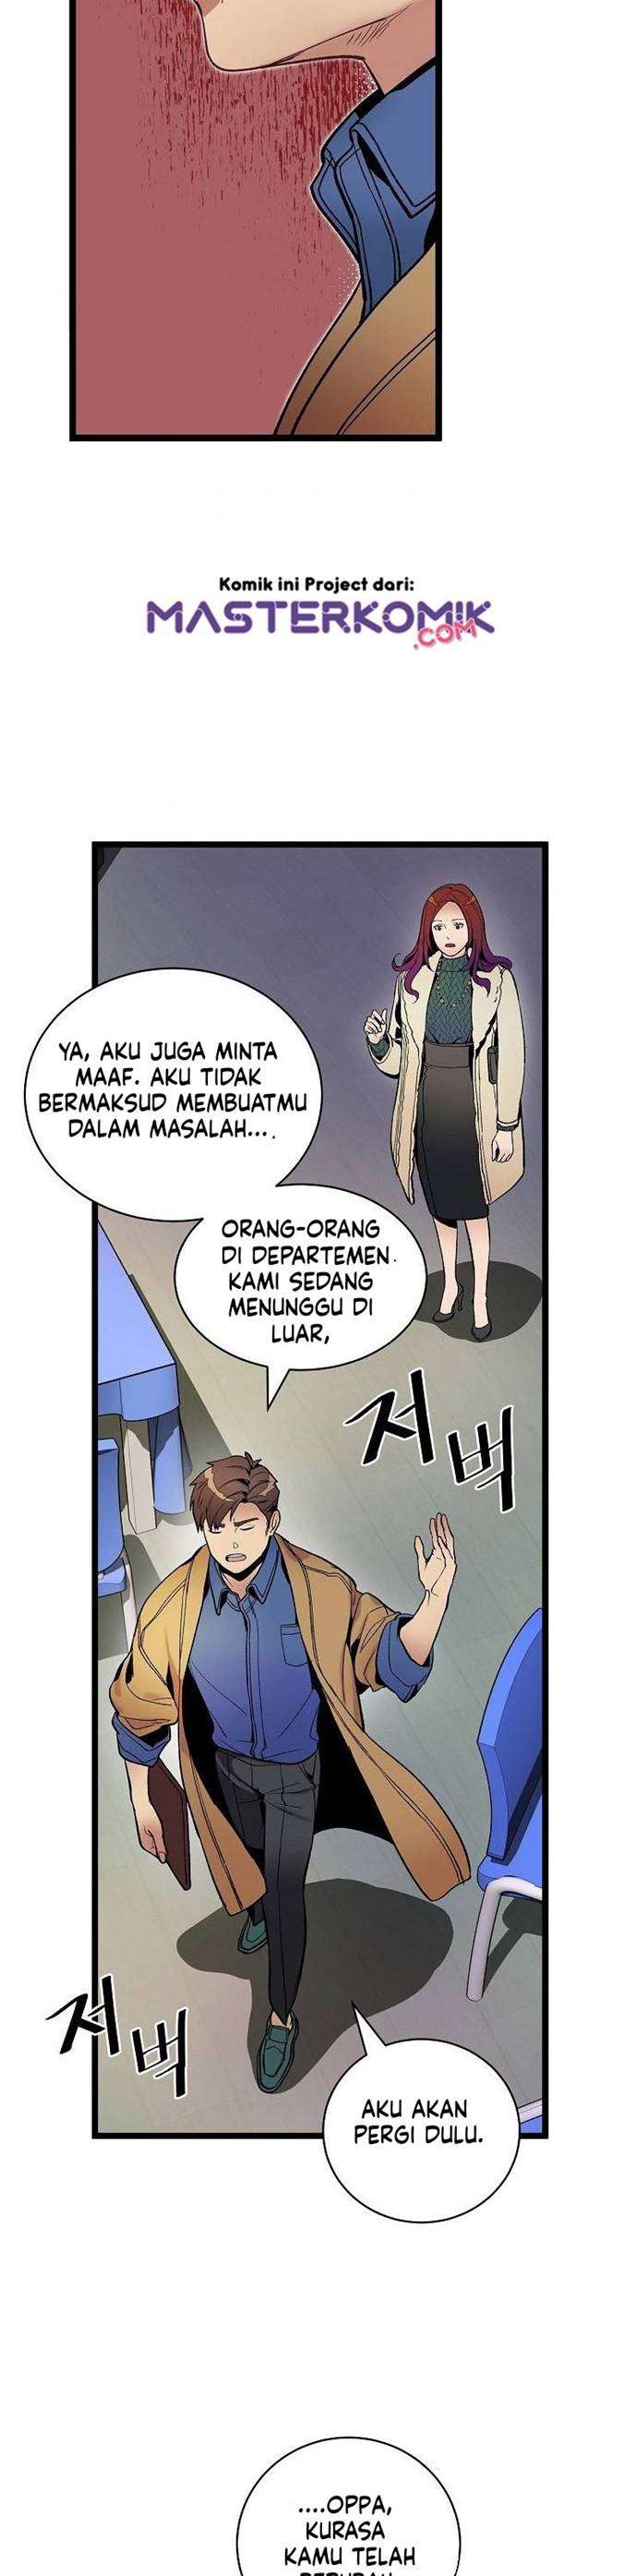 I Am Alone Genius DNA Chapter 17